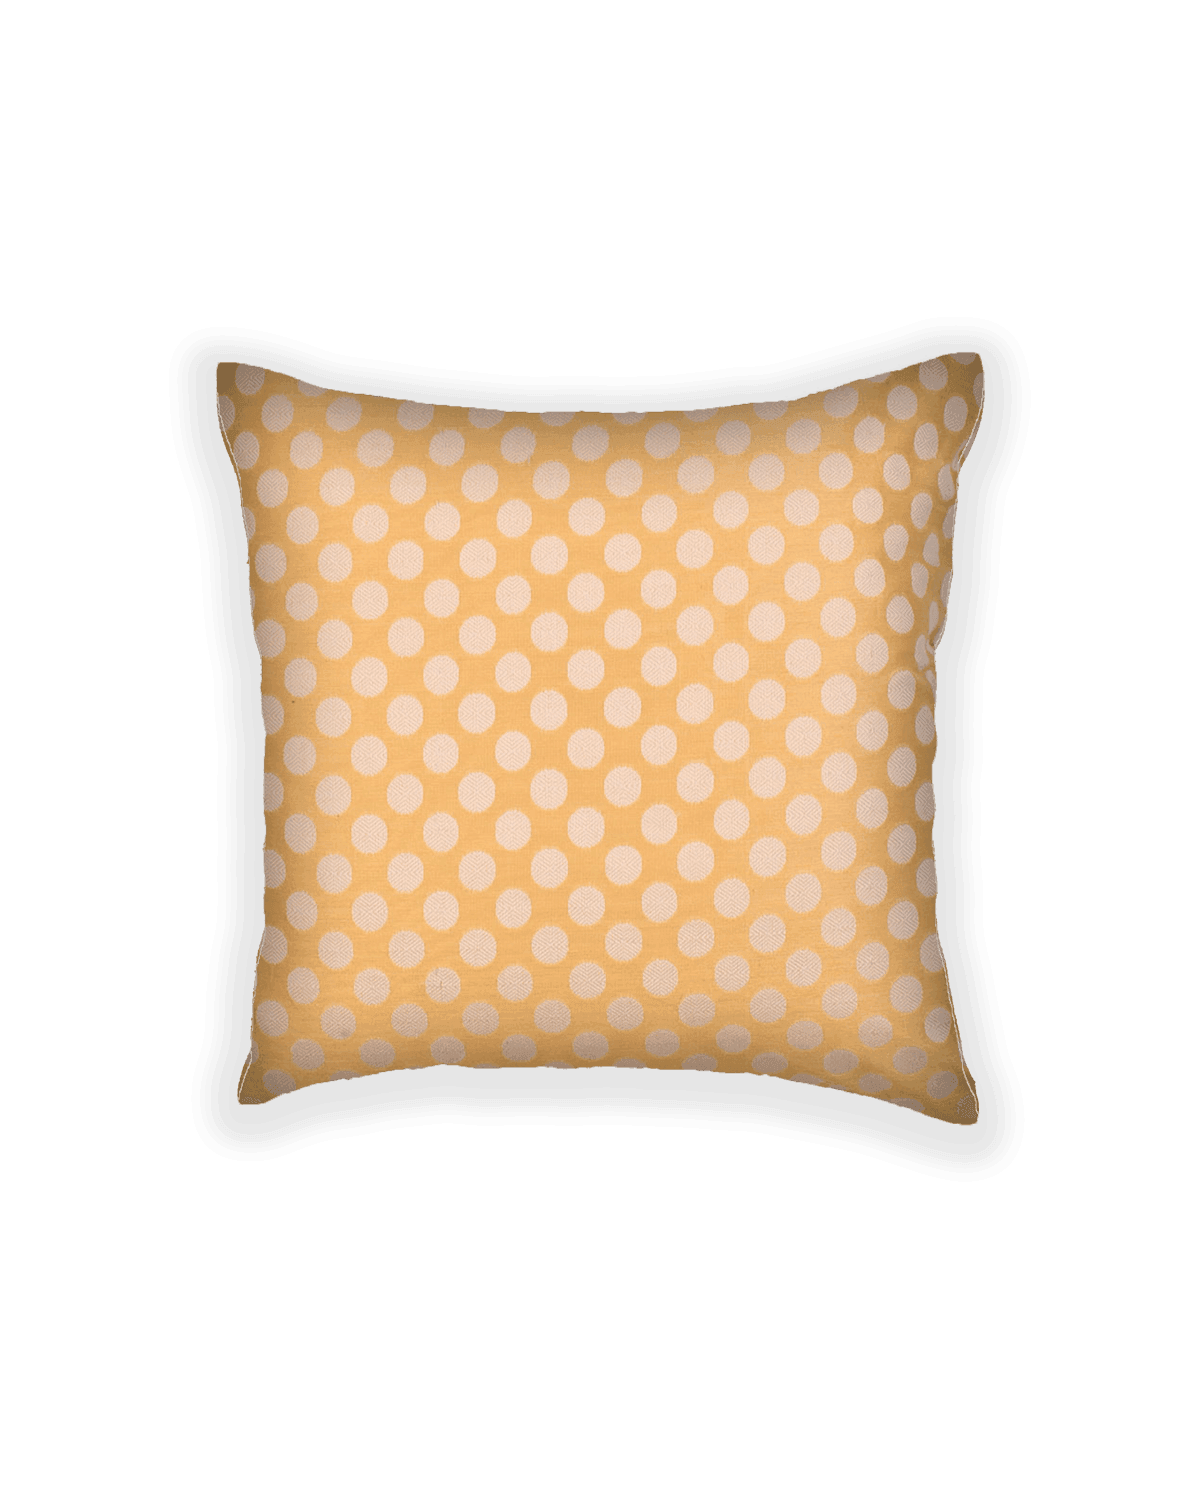 Beige Resham Polka Dots Brocade Woven Poly Cotton Cushion Cover 16" - By HolyWeaves, Benares